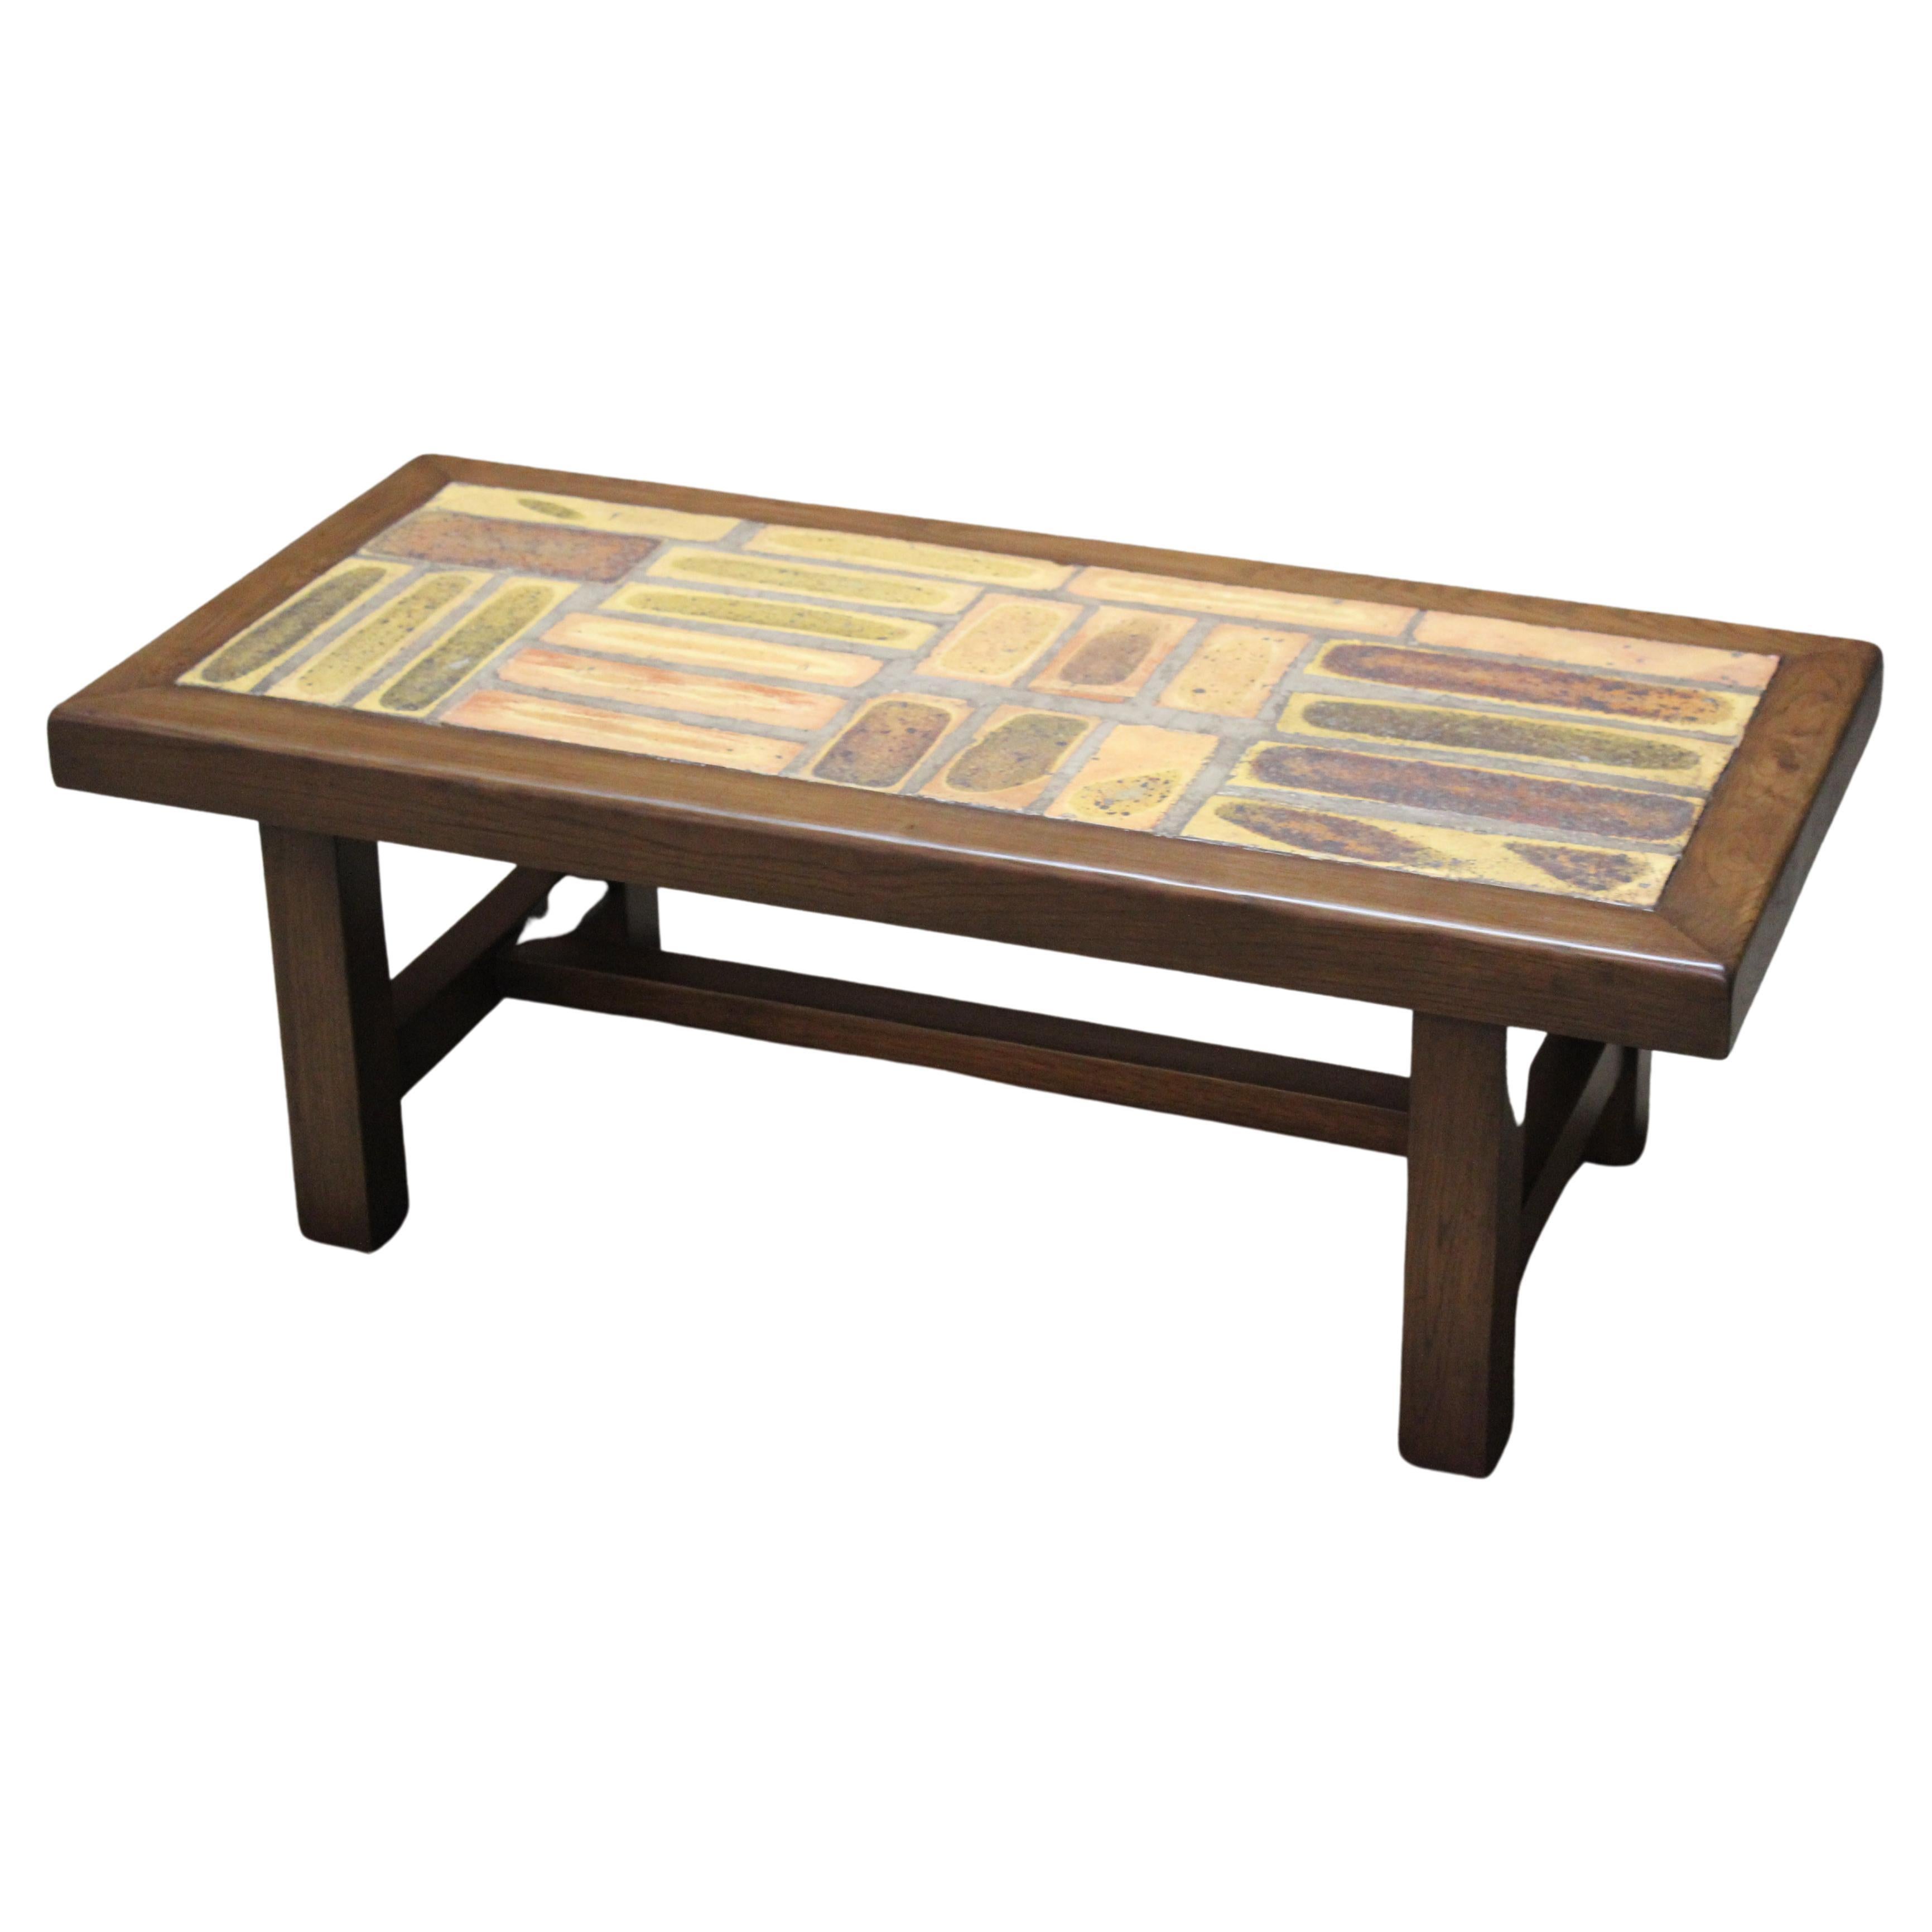 1960s French Modernist Ceramic Tile and Walnut Coffee Table